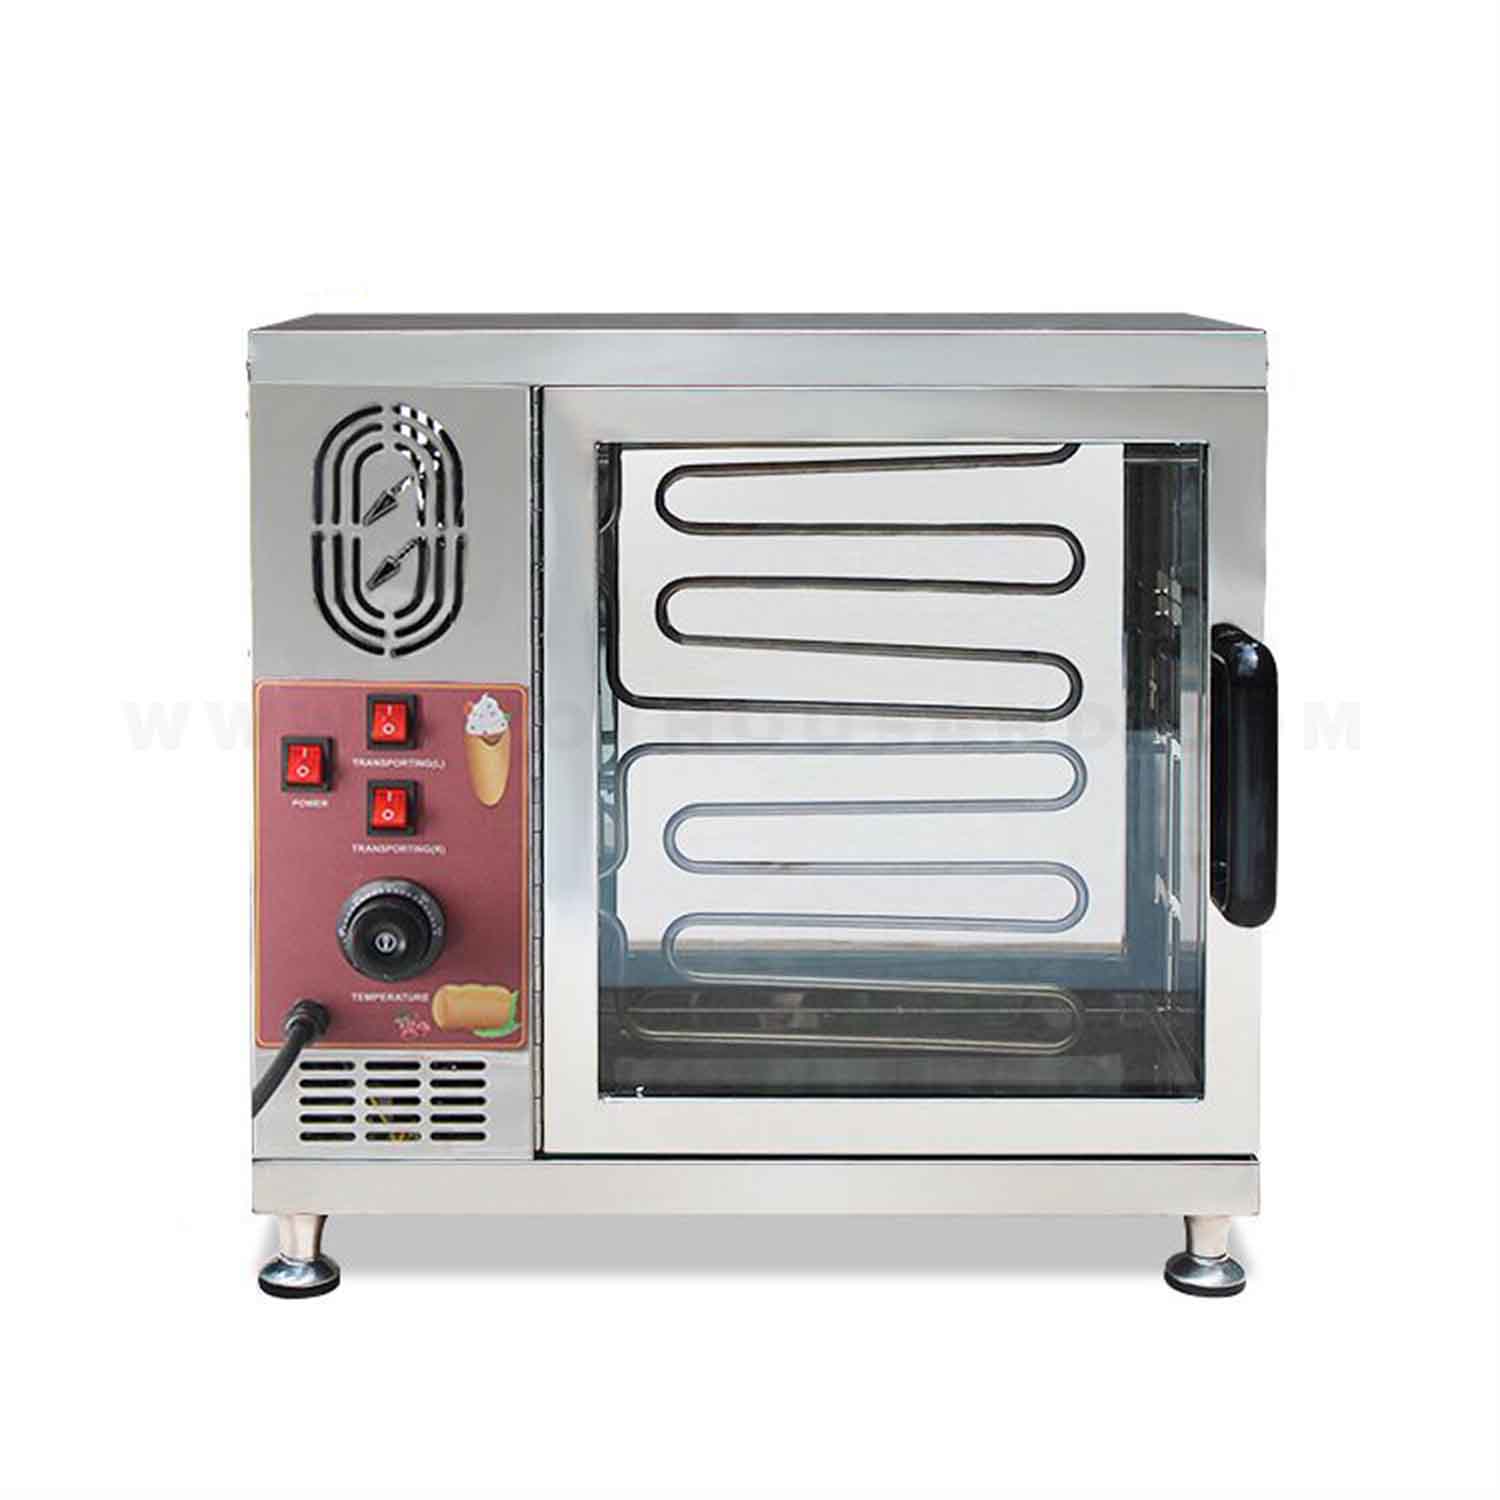 oven commercial large-capacity 100 liter cake| Alibaba.com